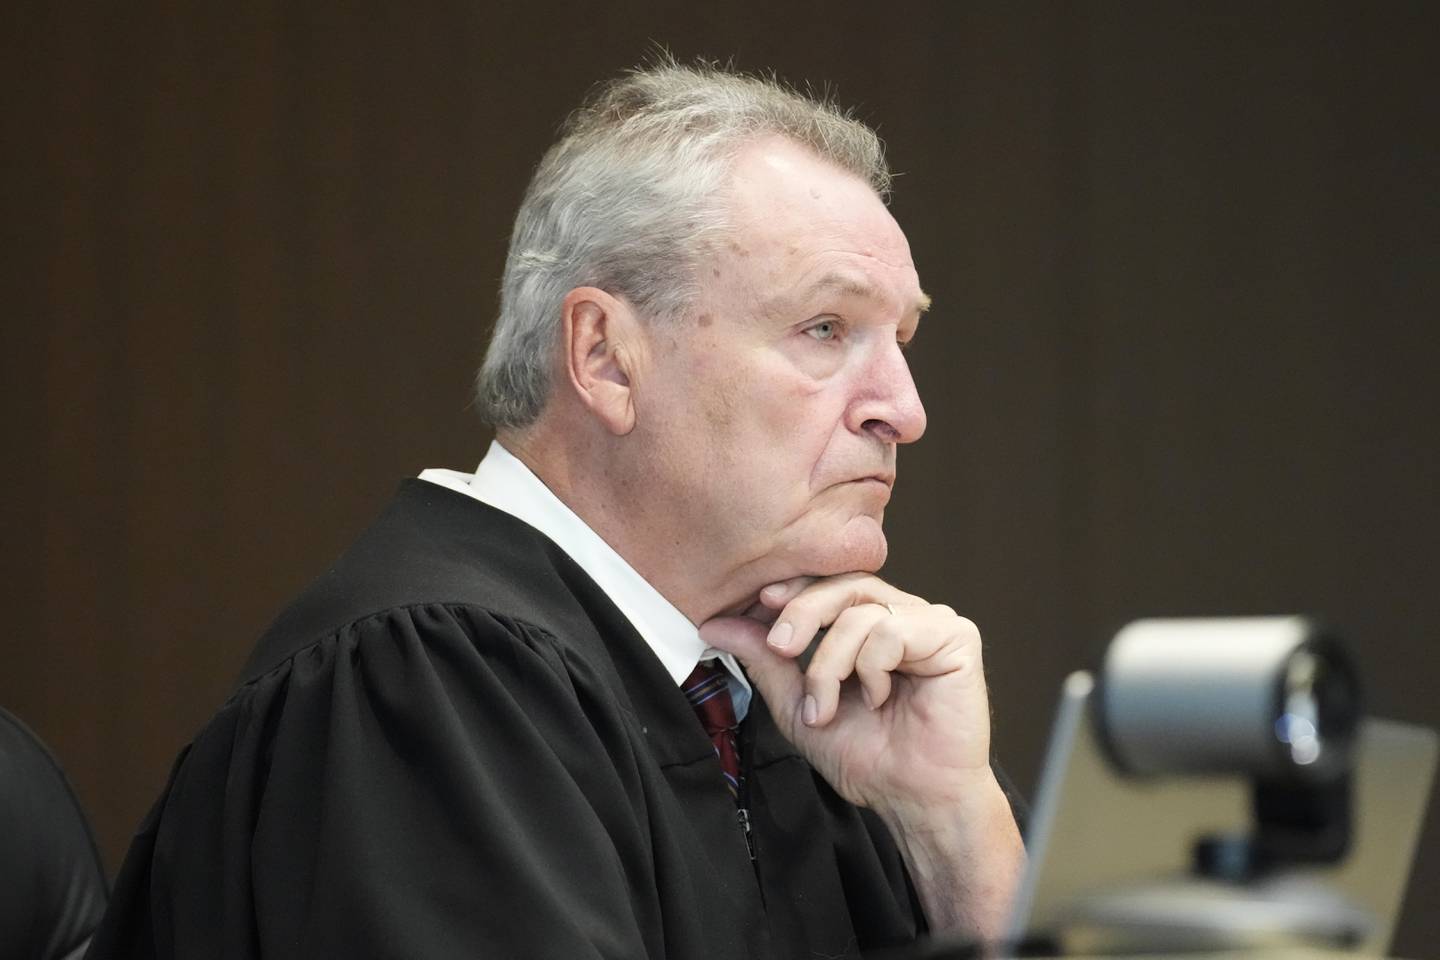 Judge George D. Strickland listens to Robert E. Crimo Jr's attorney George Gomez during an appearance at the Lake County Courthouse, Monday, Aug. 28, 2023, in Waukegan, Ill. The judge on Monday refused to dismiss the case against Crimo Jr. who helped his son obtain a gun license three years before authorities say the younger man fatally shot seven people at a 2022 Fourth of July parade in suburban Chicago. Crimo Jr.'s Nov. 6 trial will go head as previously scheduled.